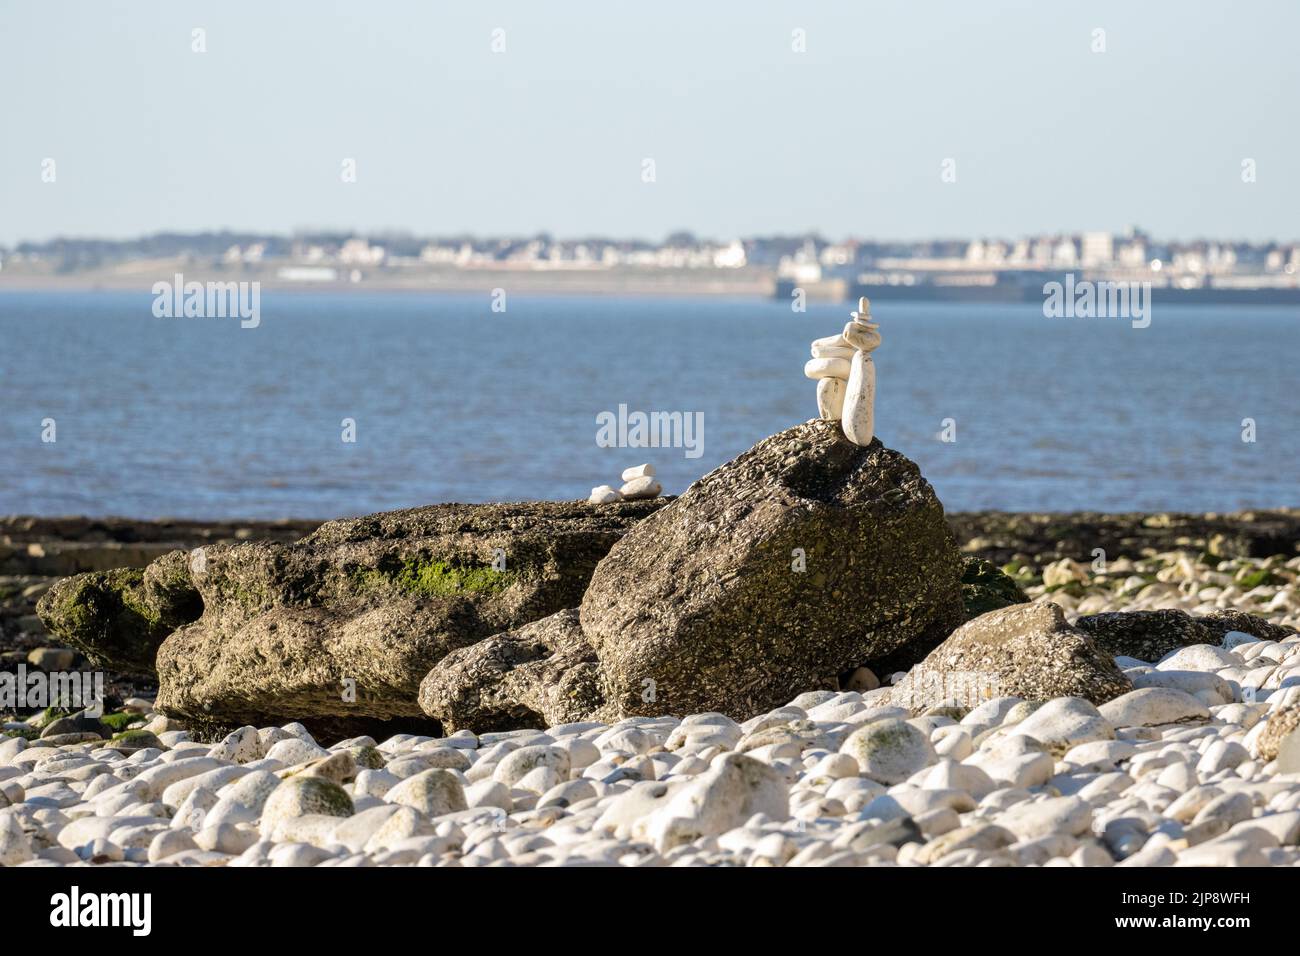 Things to do at the seaside - make pebble sculptures. South Landing, Flamborough, East Riding of Yorkshire, England, UK Stock Photo